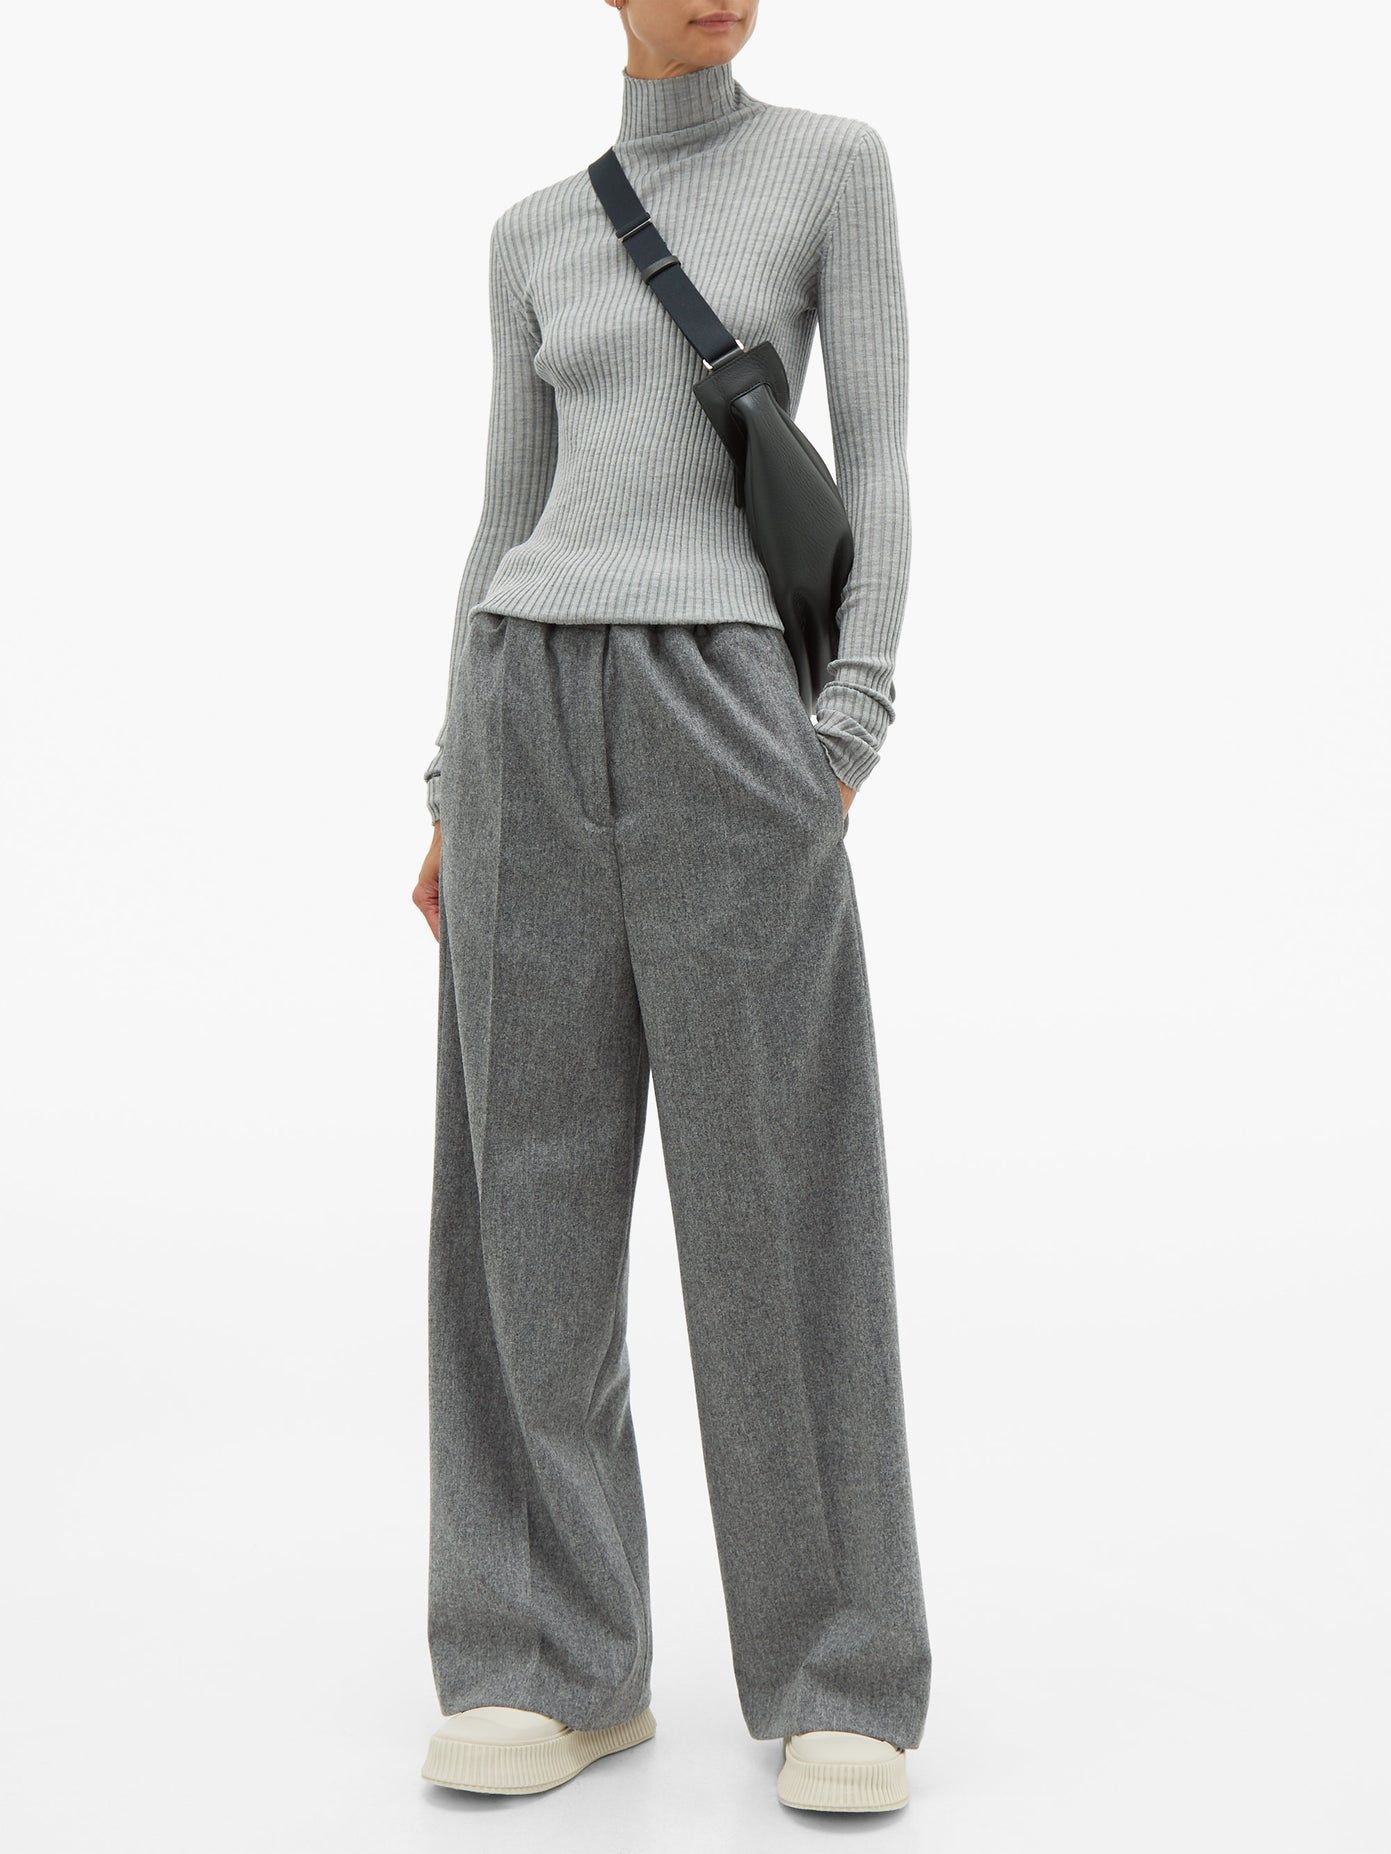 Elevate Your Wardrobe with Versatile Grey Trousers